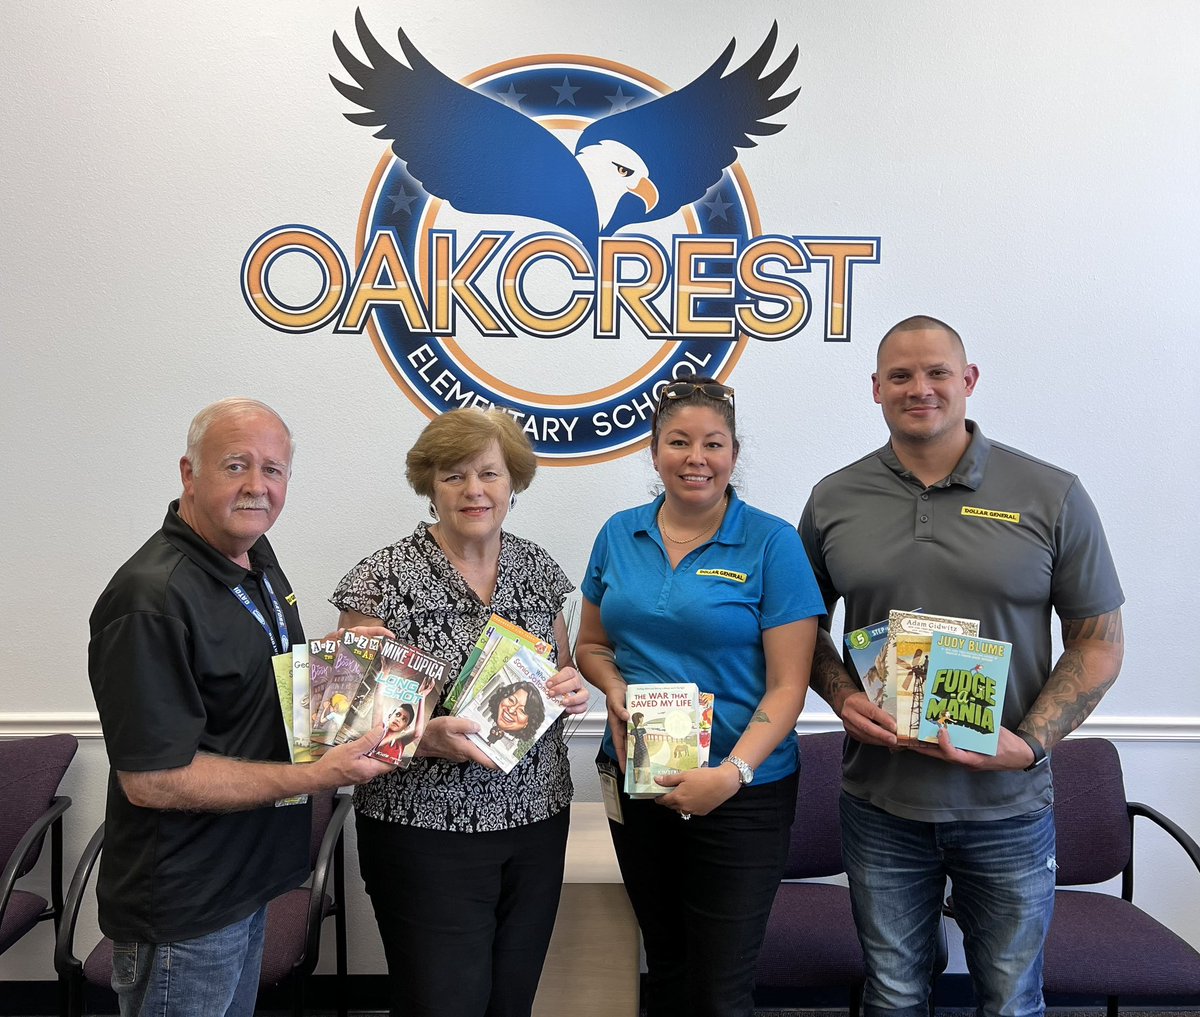 Today we received a generous donation of 📚 from Dollar General. 

This donation will help ensure all students have a book to read in the upcoming 2023-2024 school year.  ❤️

#ItTakesAVillage #readersareleaders #onlythebestatoakcrest